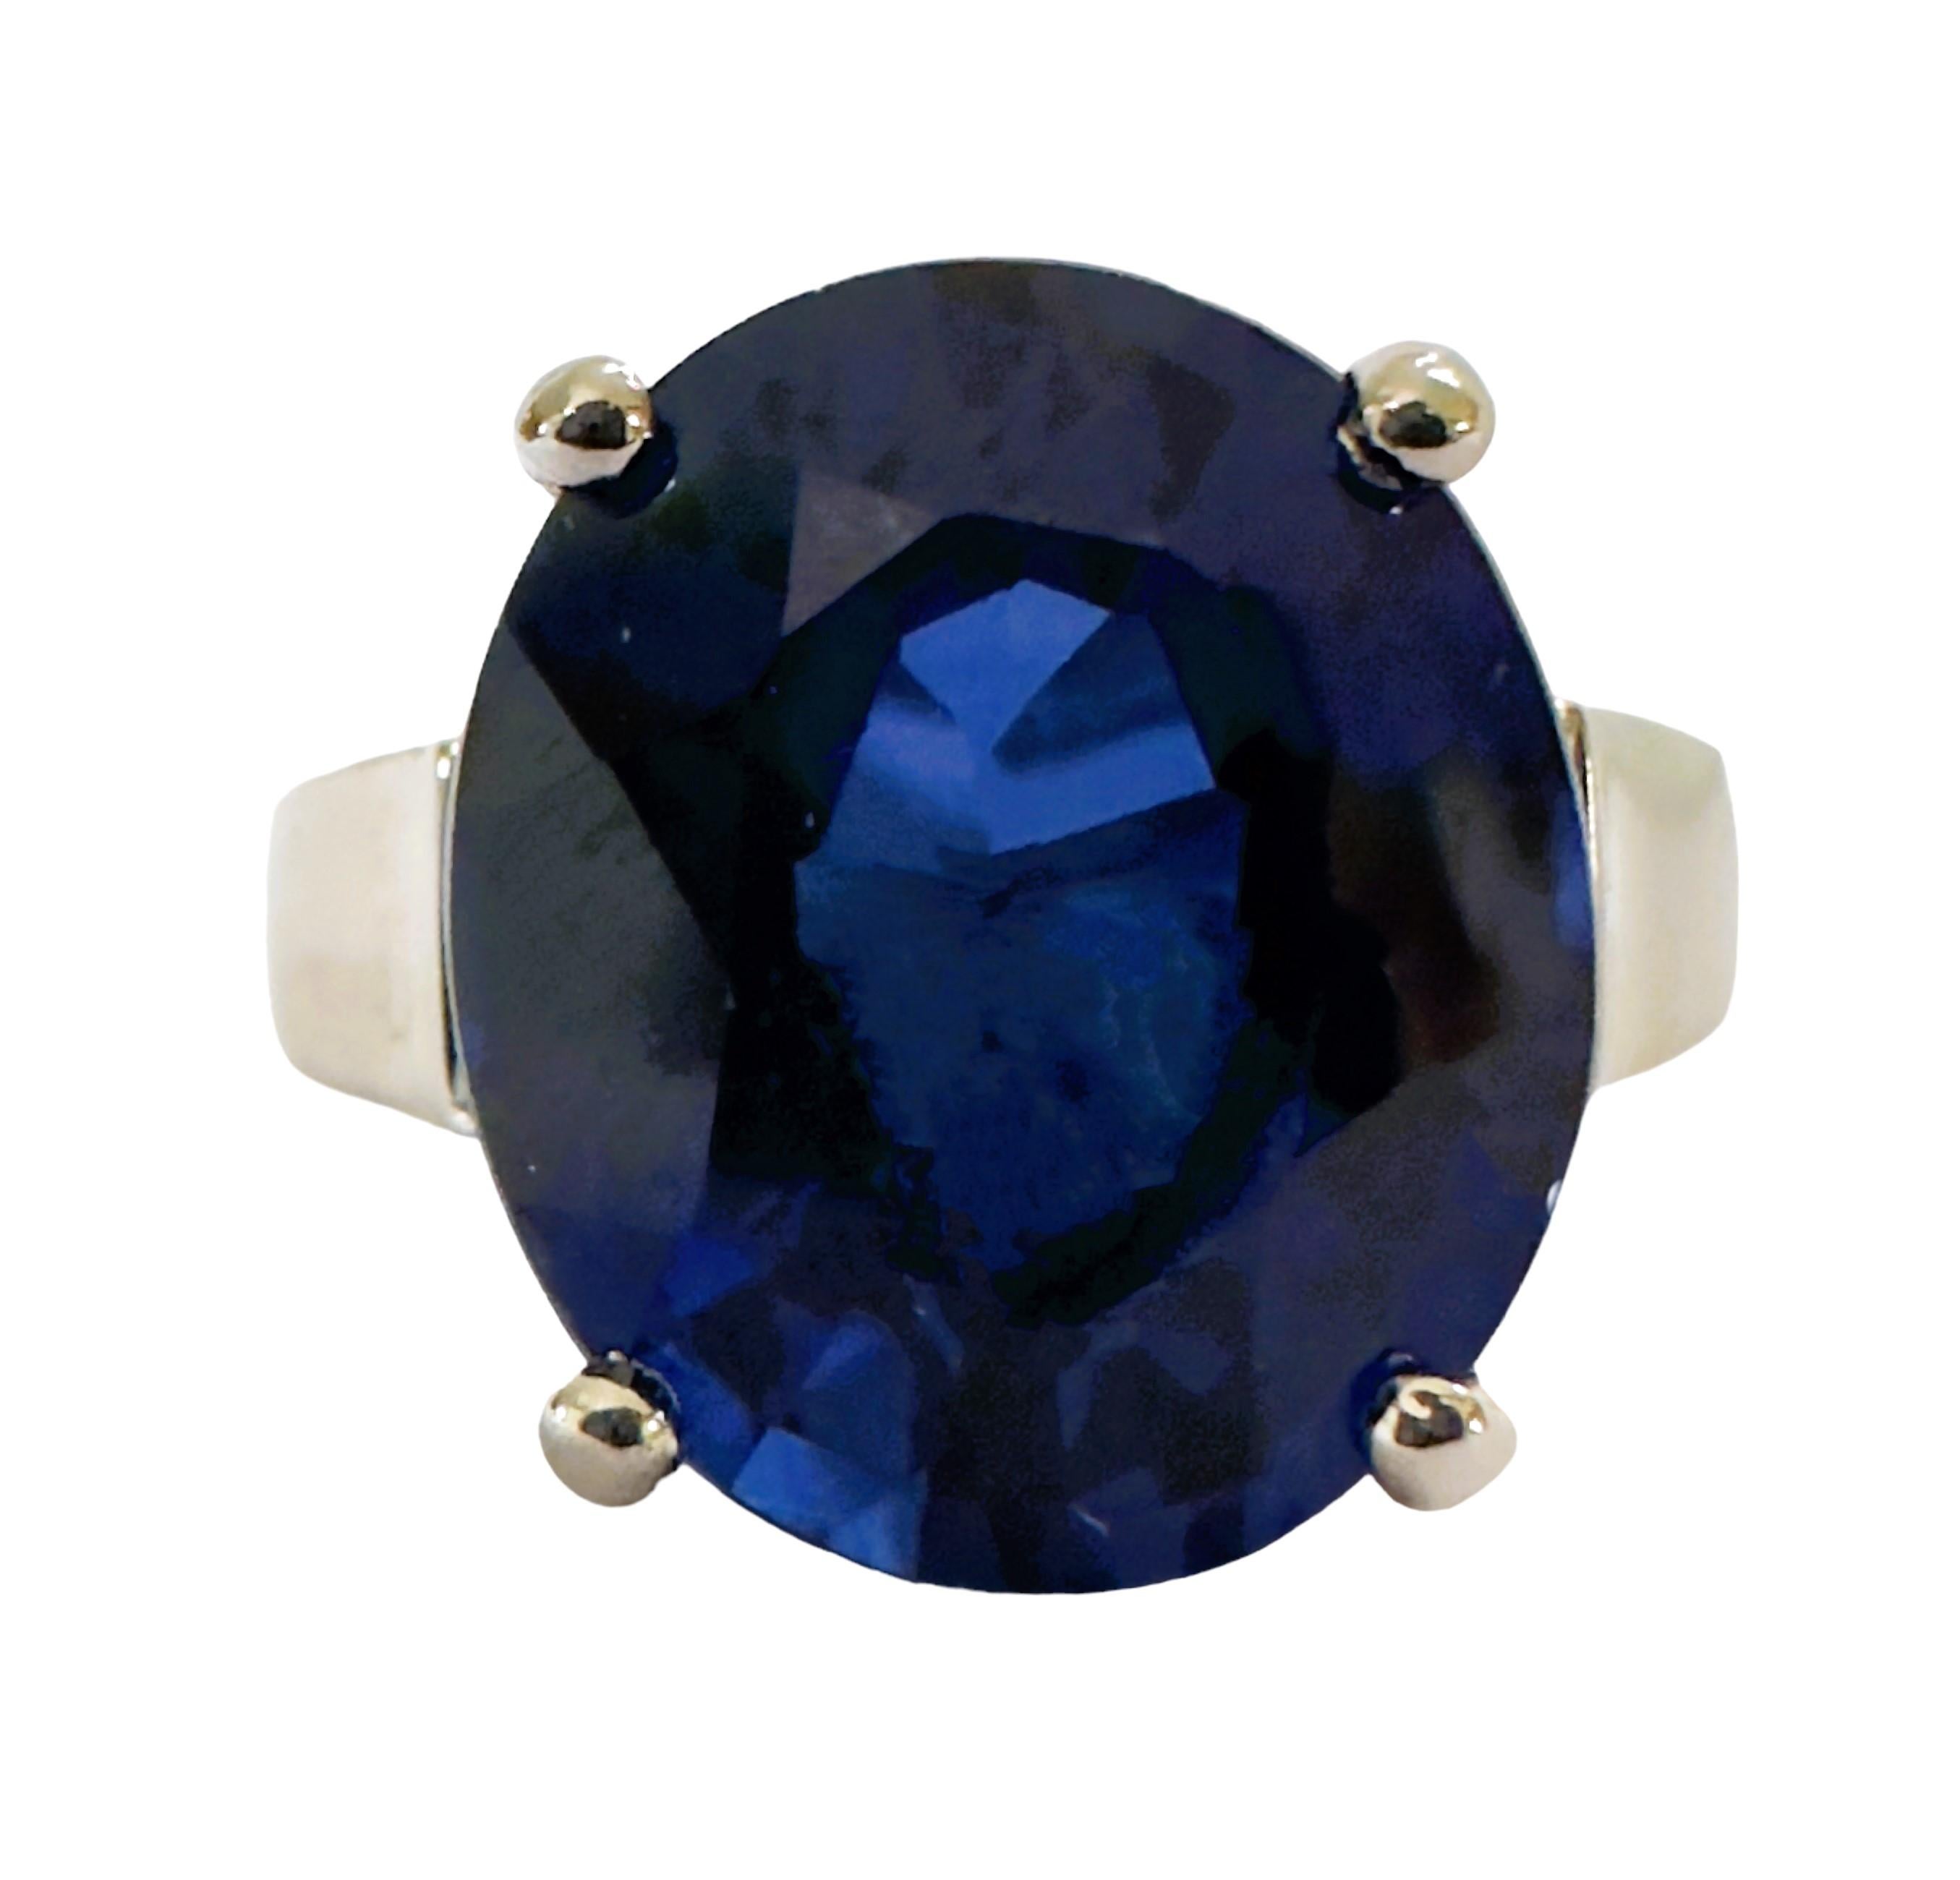 This stone has such gorgeous color!  The ring is a size 5.5.  The stone is from Africa.   It is a highly rated IF (Internally Flawless) stone.  The stone is an oval cut stone and is 7.8.0 cts.  It measures 13 x 11 mm.  It has 3 diamond cut royal